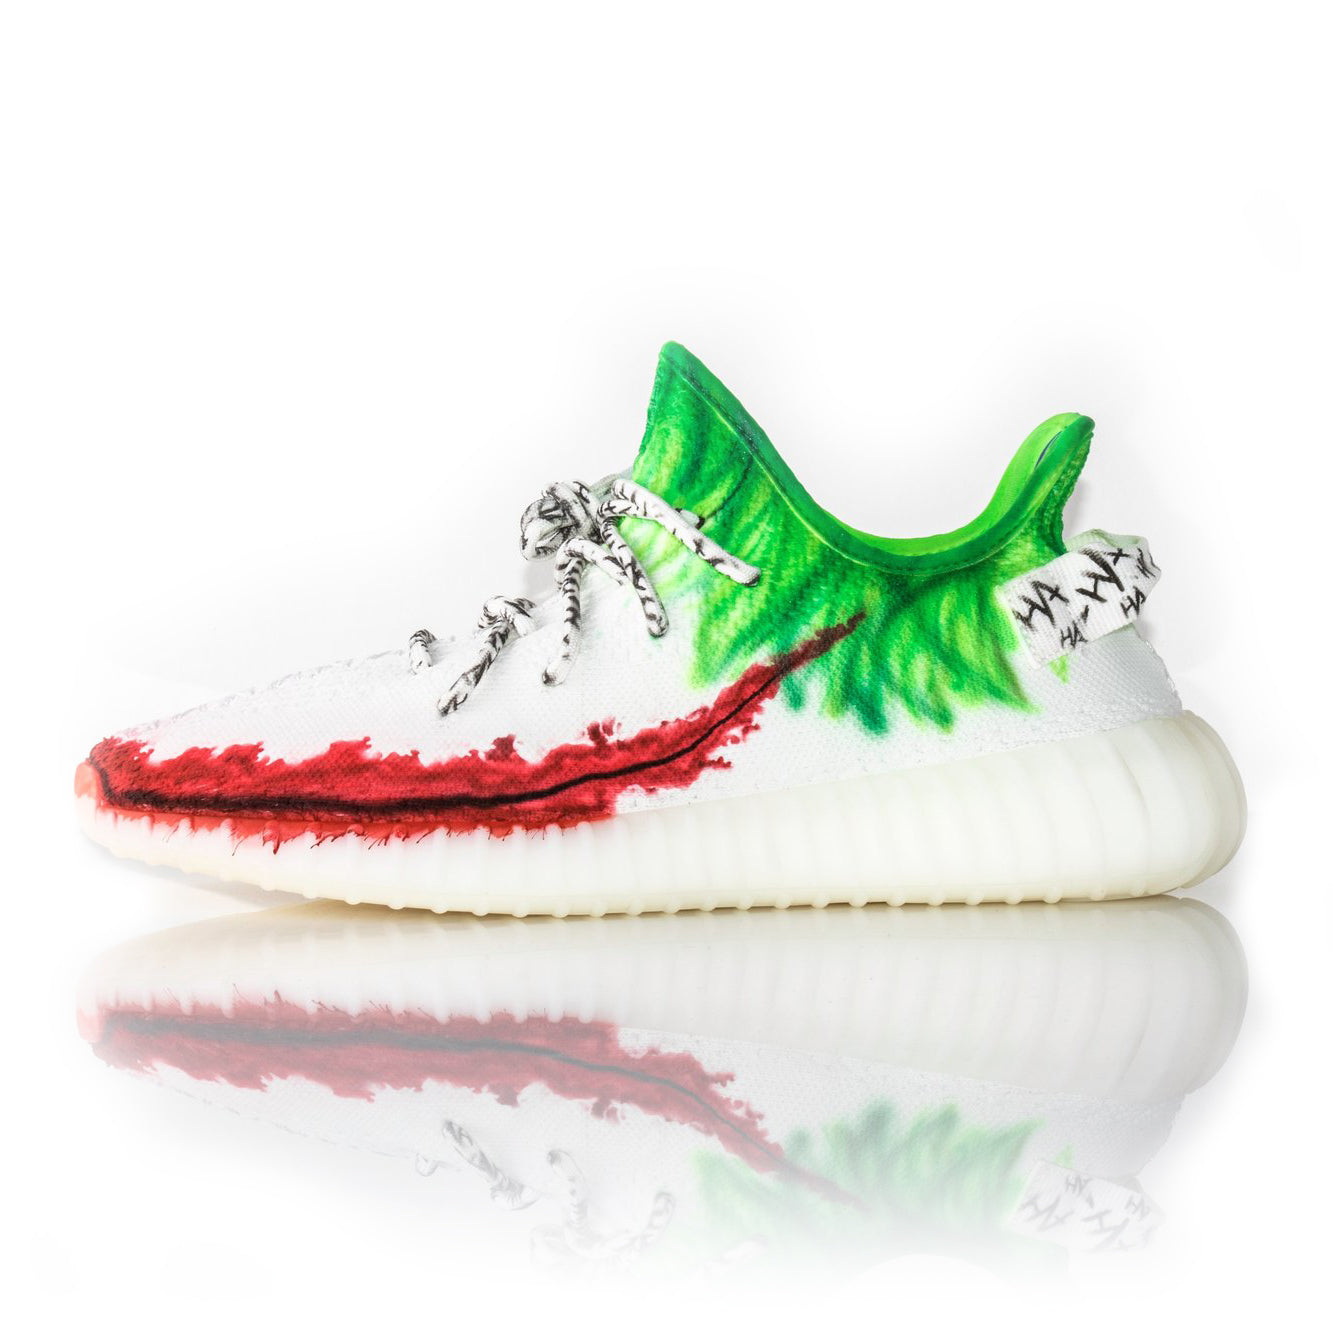 images of yeezys